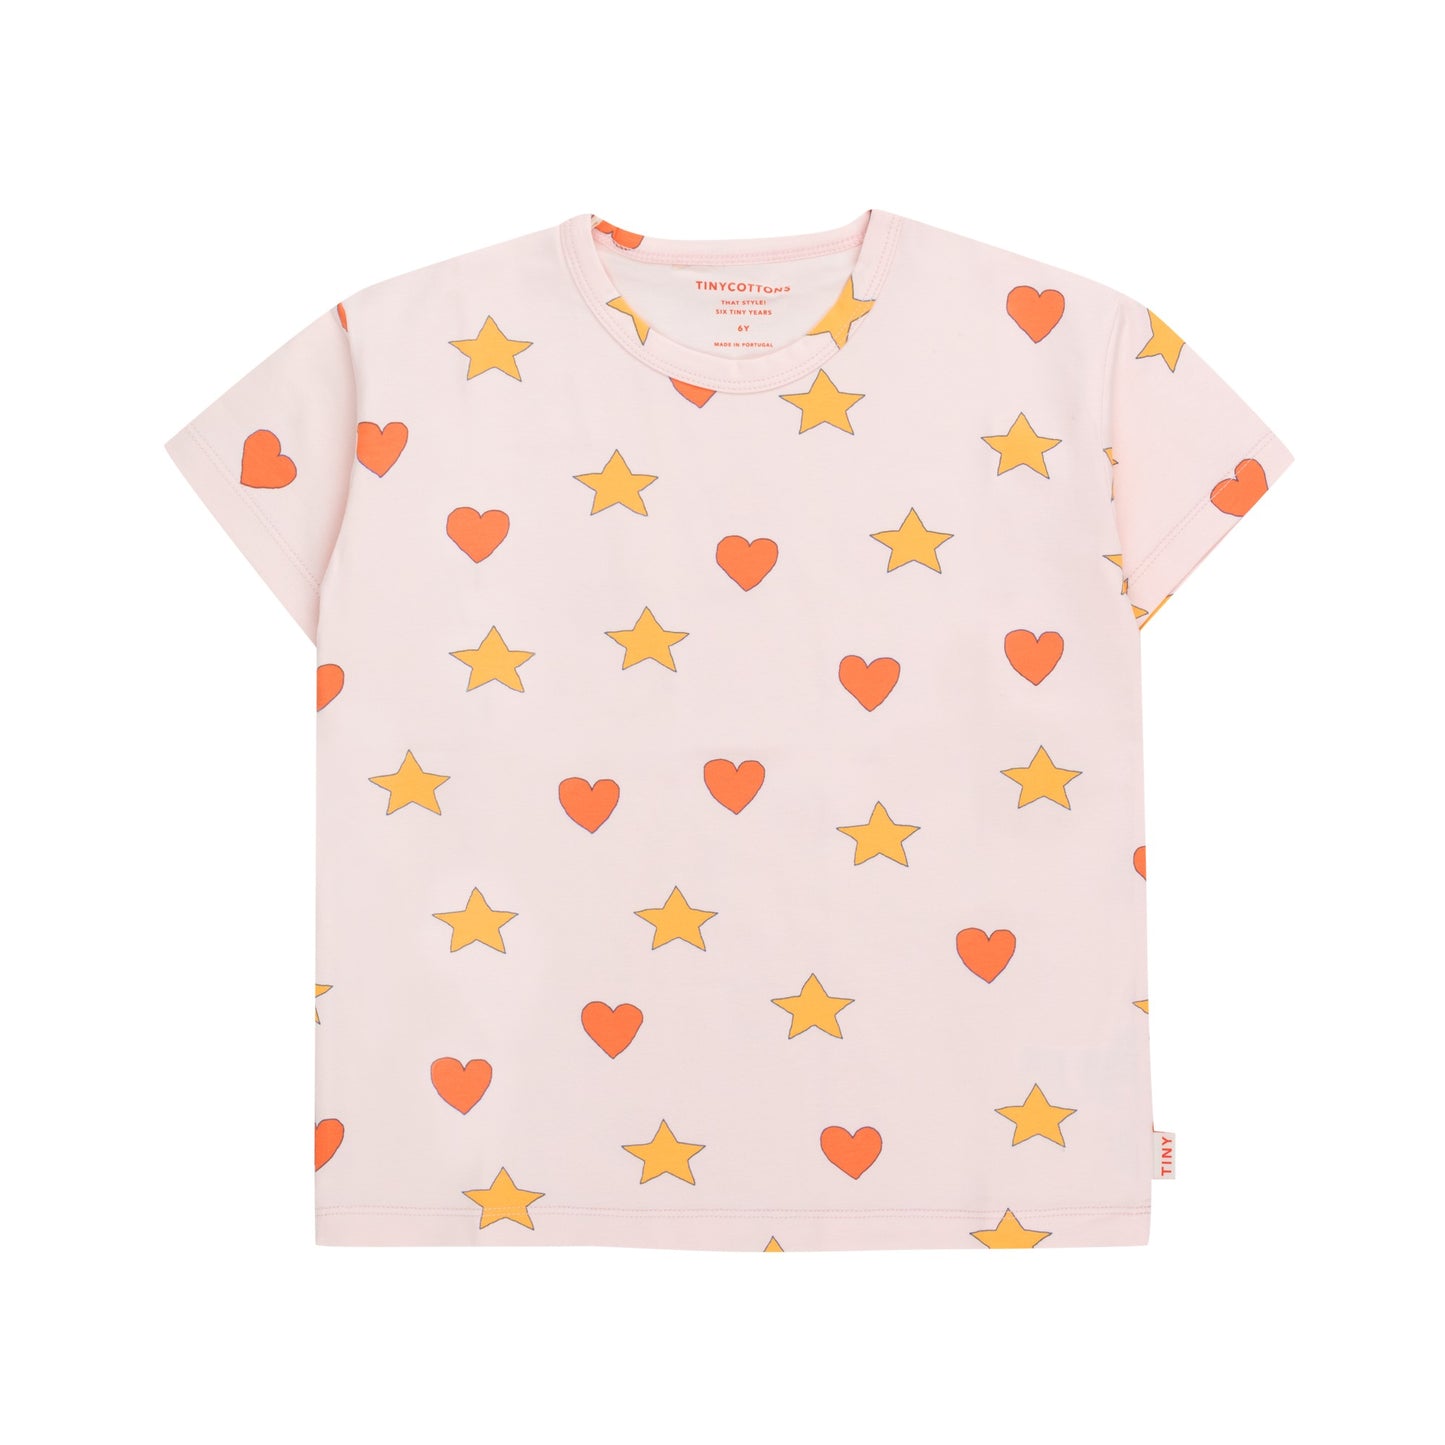 TINYCOTTONS Hearts Stars Tee ALWAYS SHOW